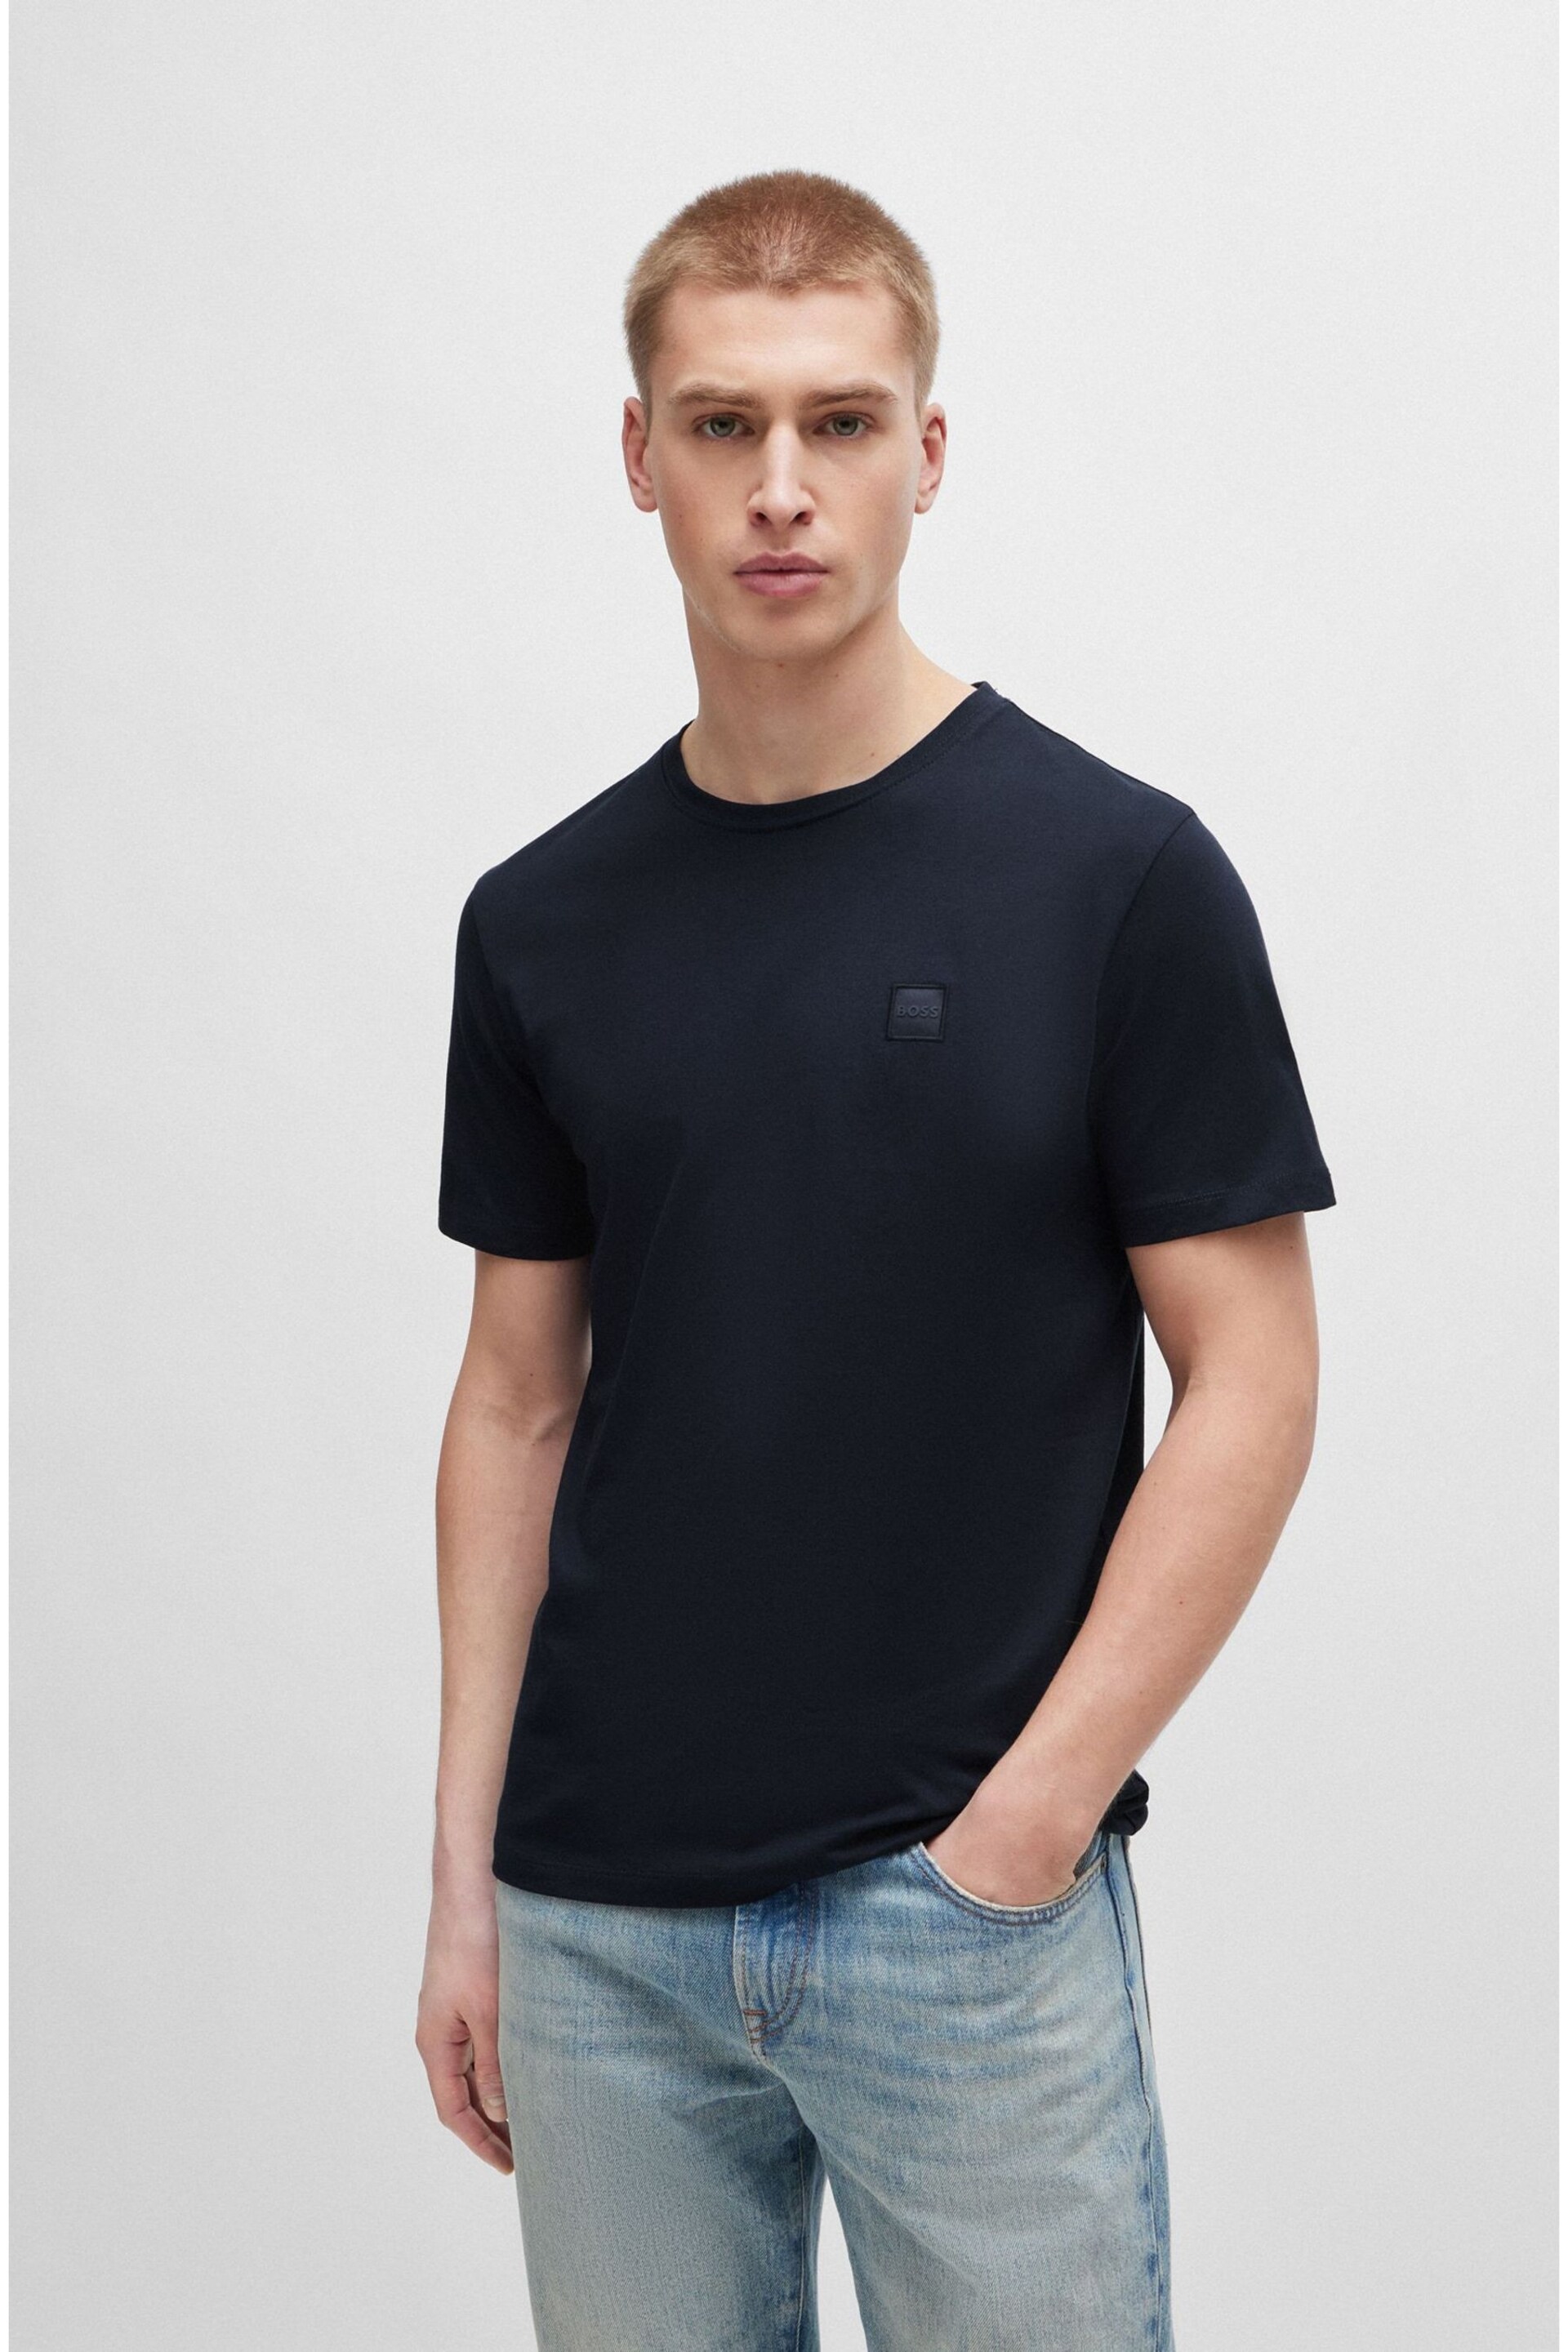 BOSS Dark Blue Relaxed Fit Box Logo T-Shirt - Image 1 of 5